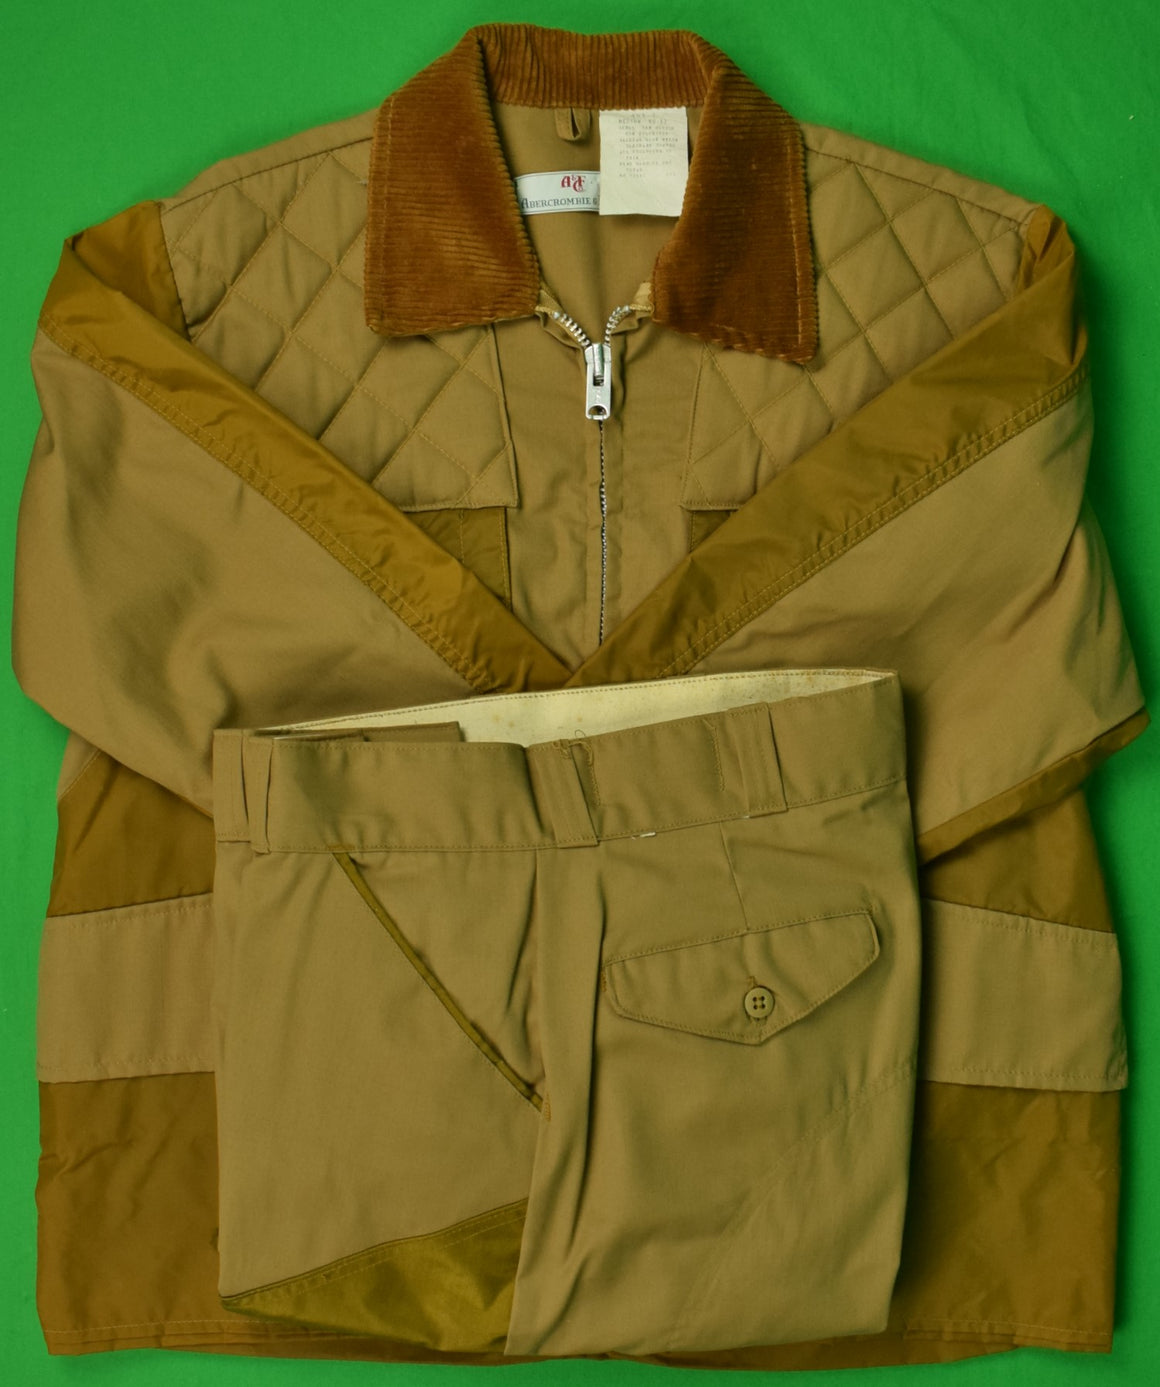 "Abercrombie & Fitch Game Bird 2pc Hunting/ Shooting Suit" Sz: Medium 40-42